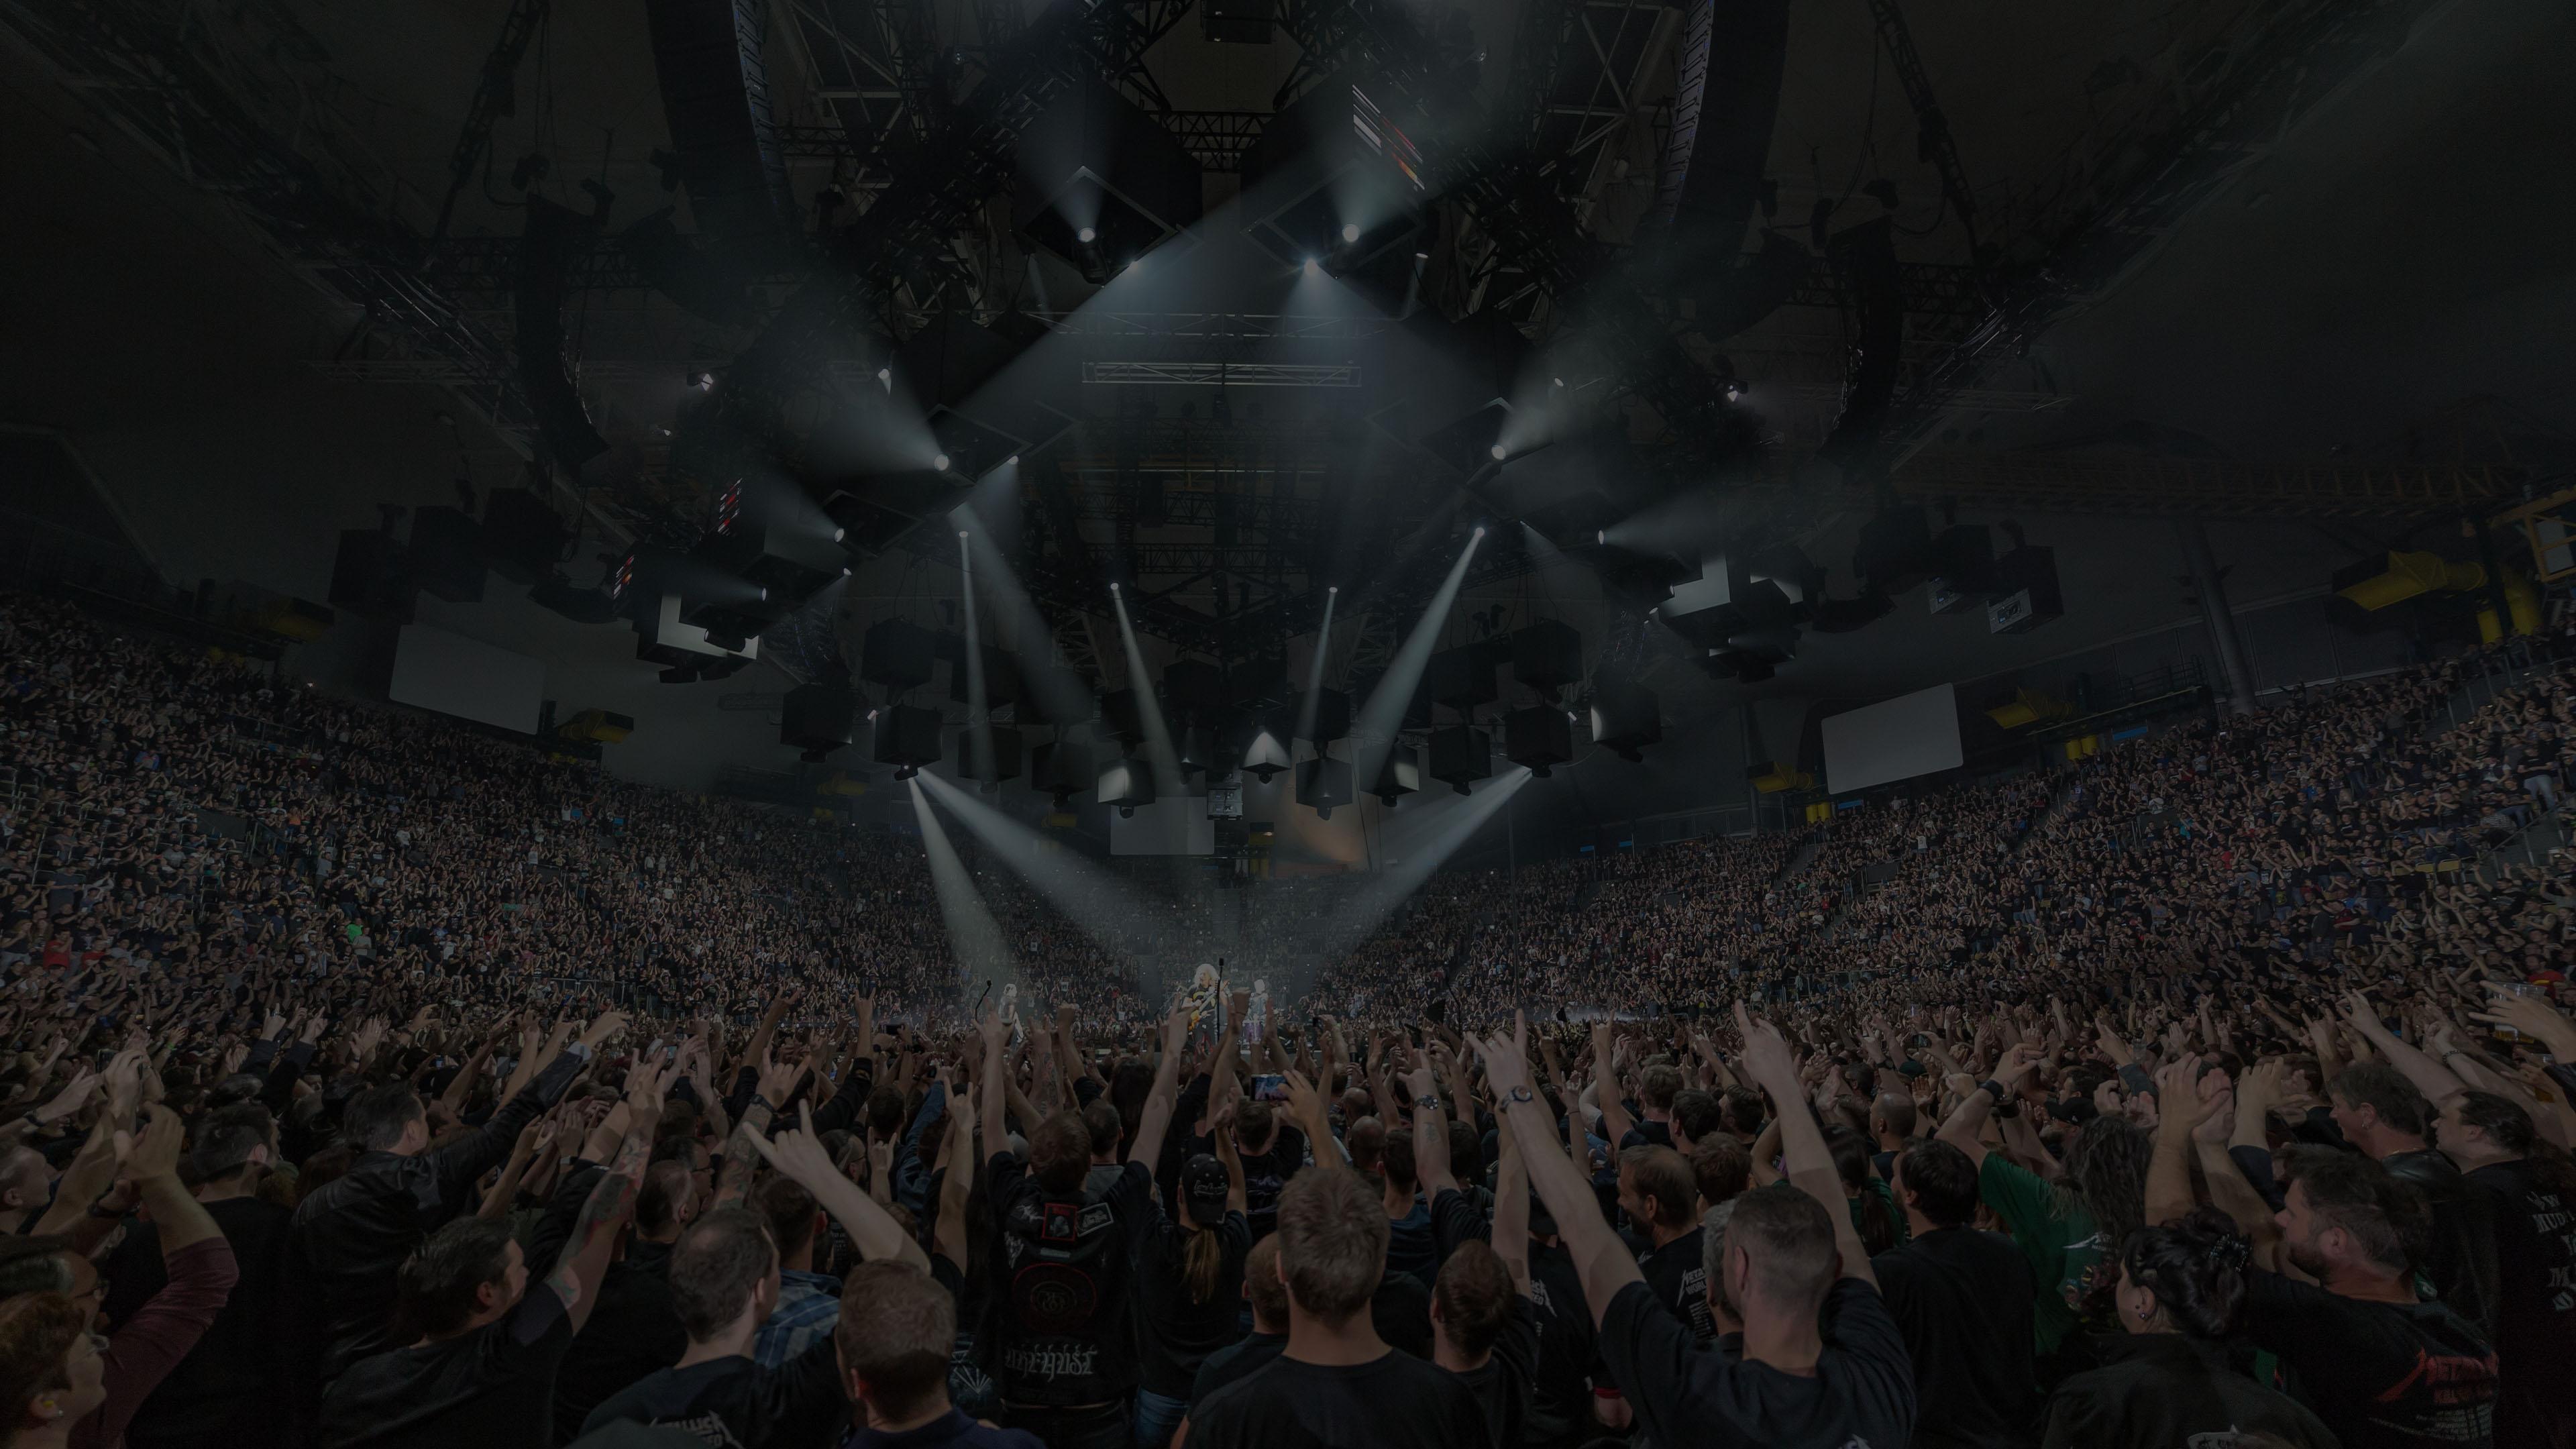 Metallica at Olympiahalle in Munich, Germany on April 26, 2018